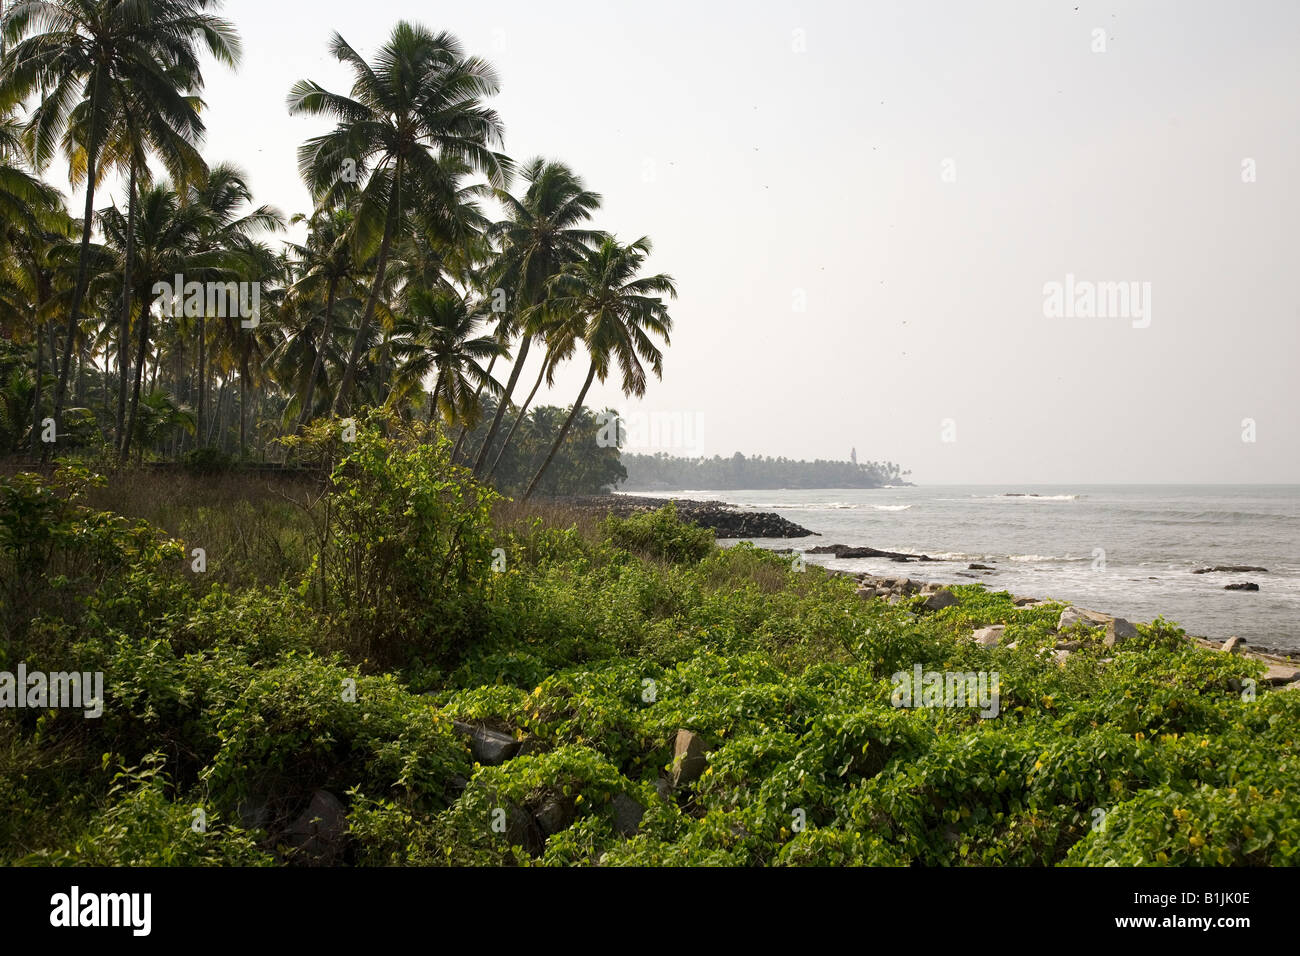 Palm trees by Thirumullavaram Beach in Kerala. The state is known for being green. Stock Photo